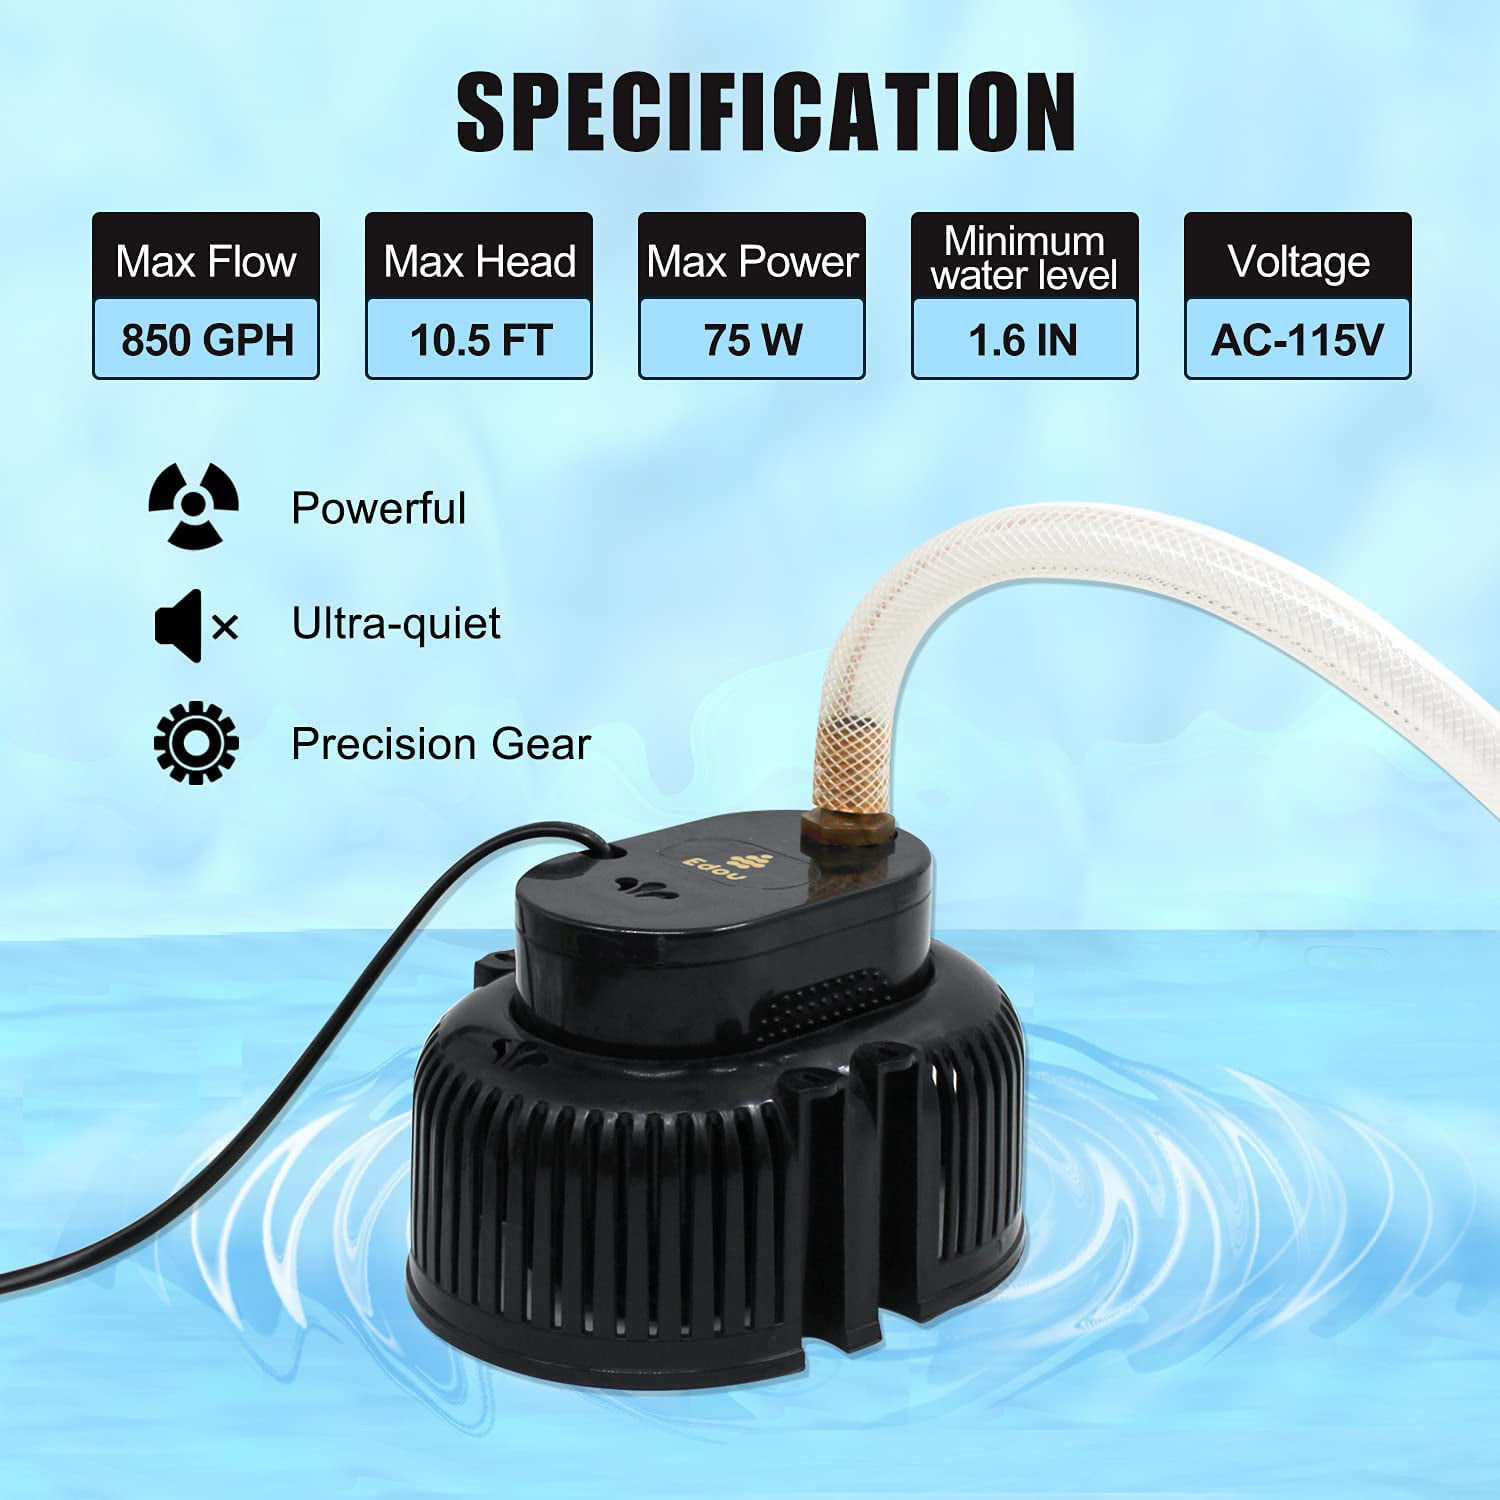 850 GPH Max Flow Includes 16 Feet Kink-Proof Drainage Hose and 3 Adapters In-Ground Pools Ideal for Draining Water Above Ground 75W Max Power EDOU Submersible Swimming Pool Cover Pump Black